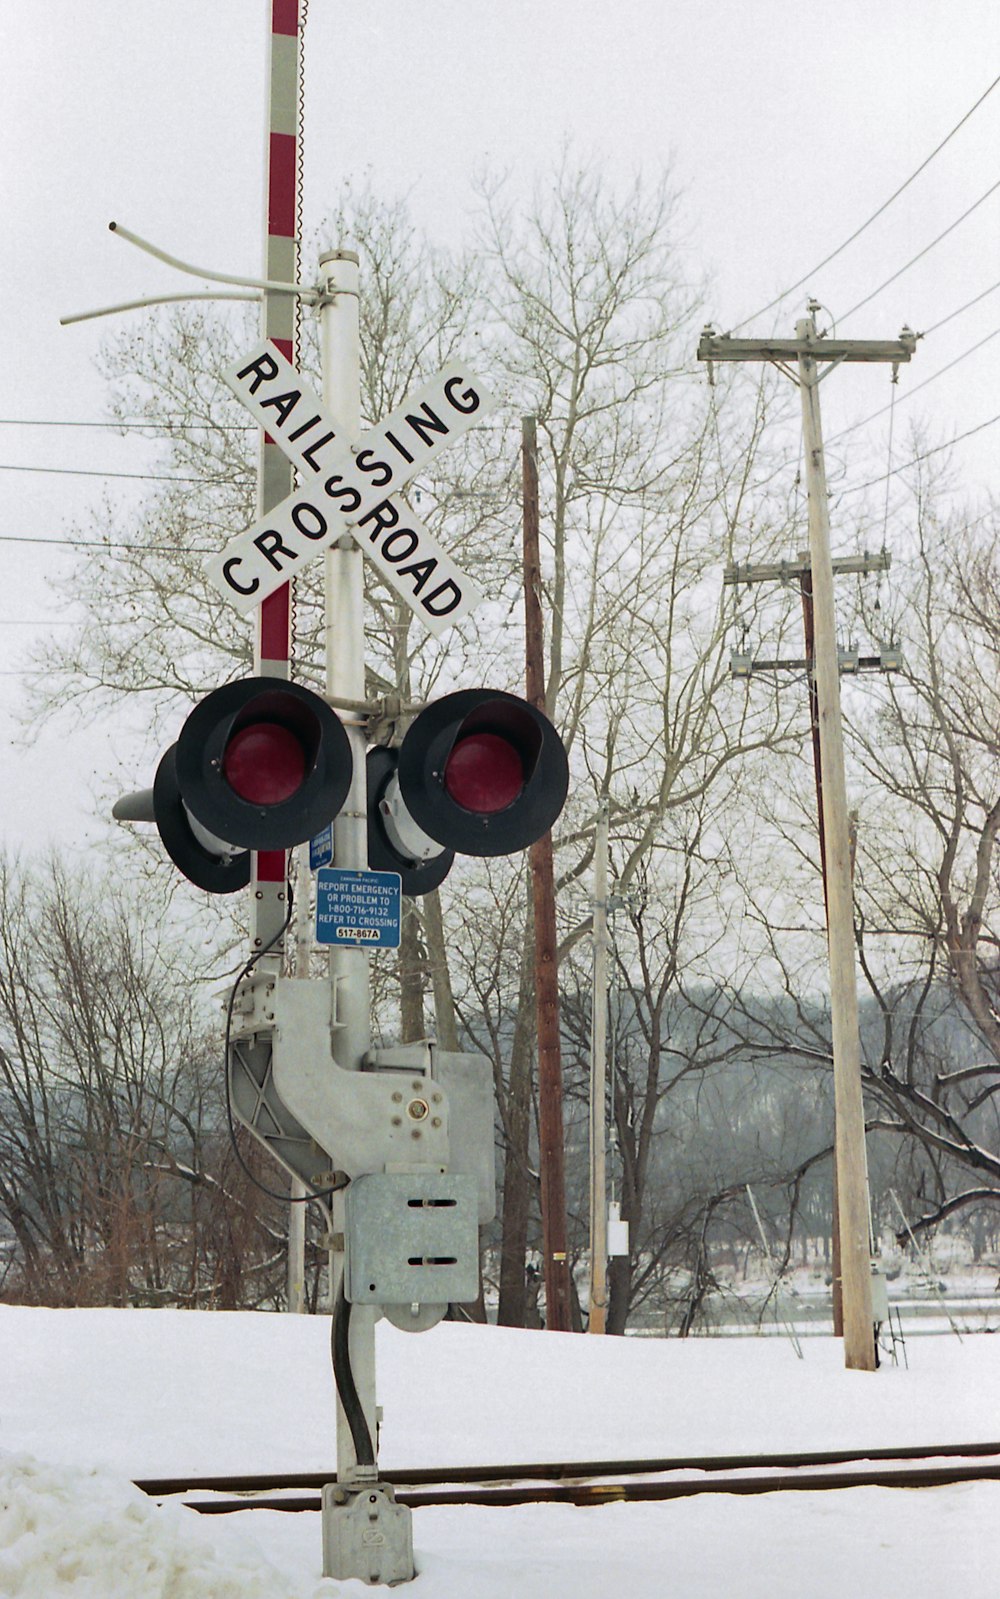 a railroad crossing signal in the snow